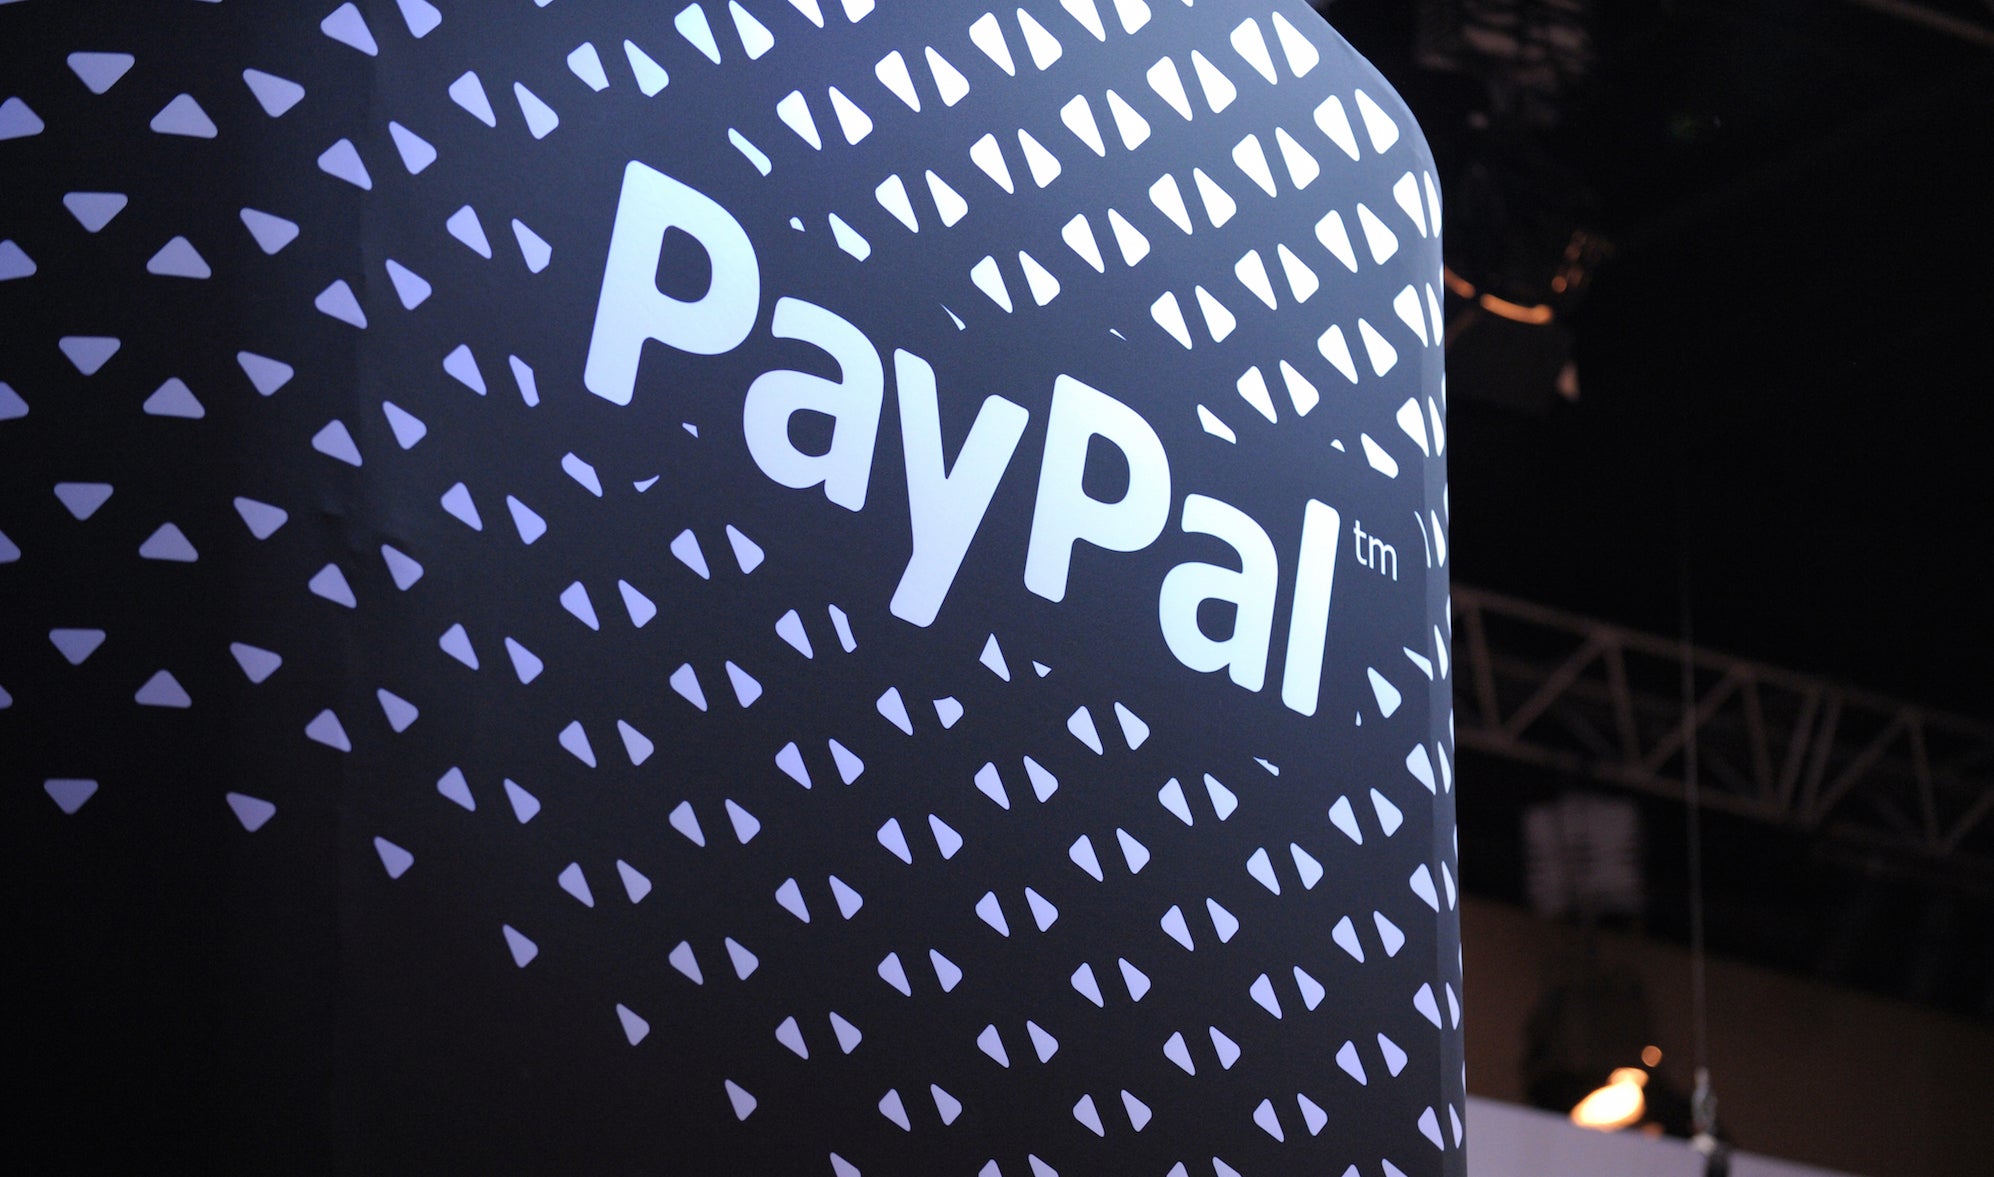 Latest News on PayPal